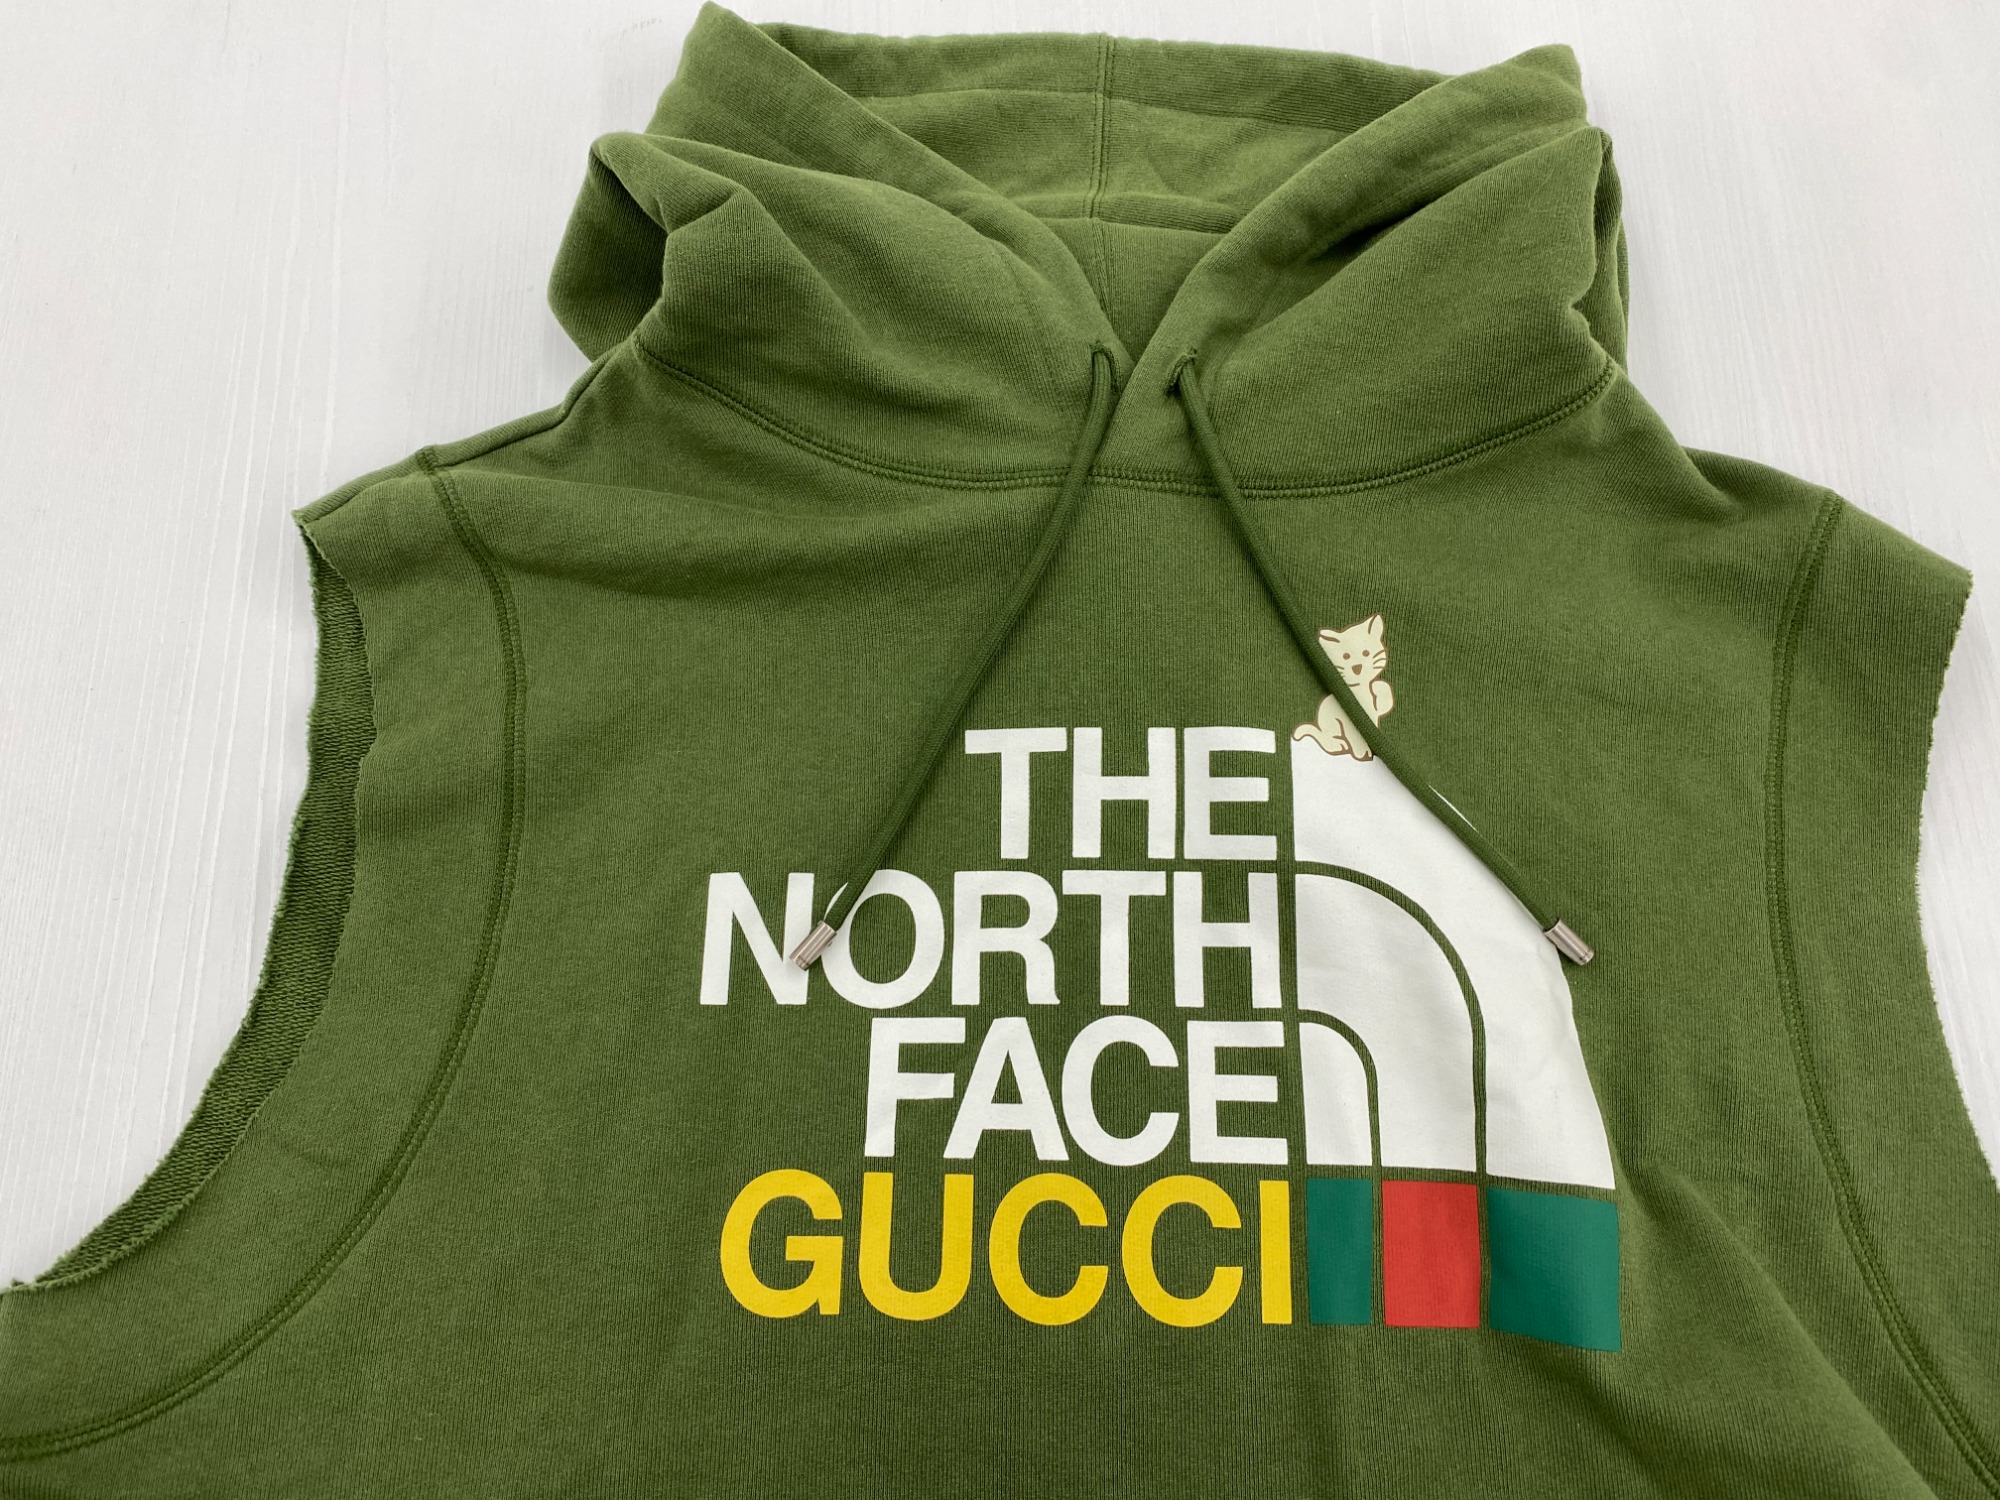 THE NORTH FACE×GUCCI】 ノースリーブパーカーのご紹介です 